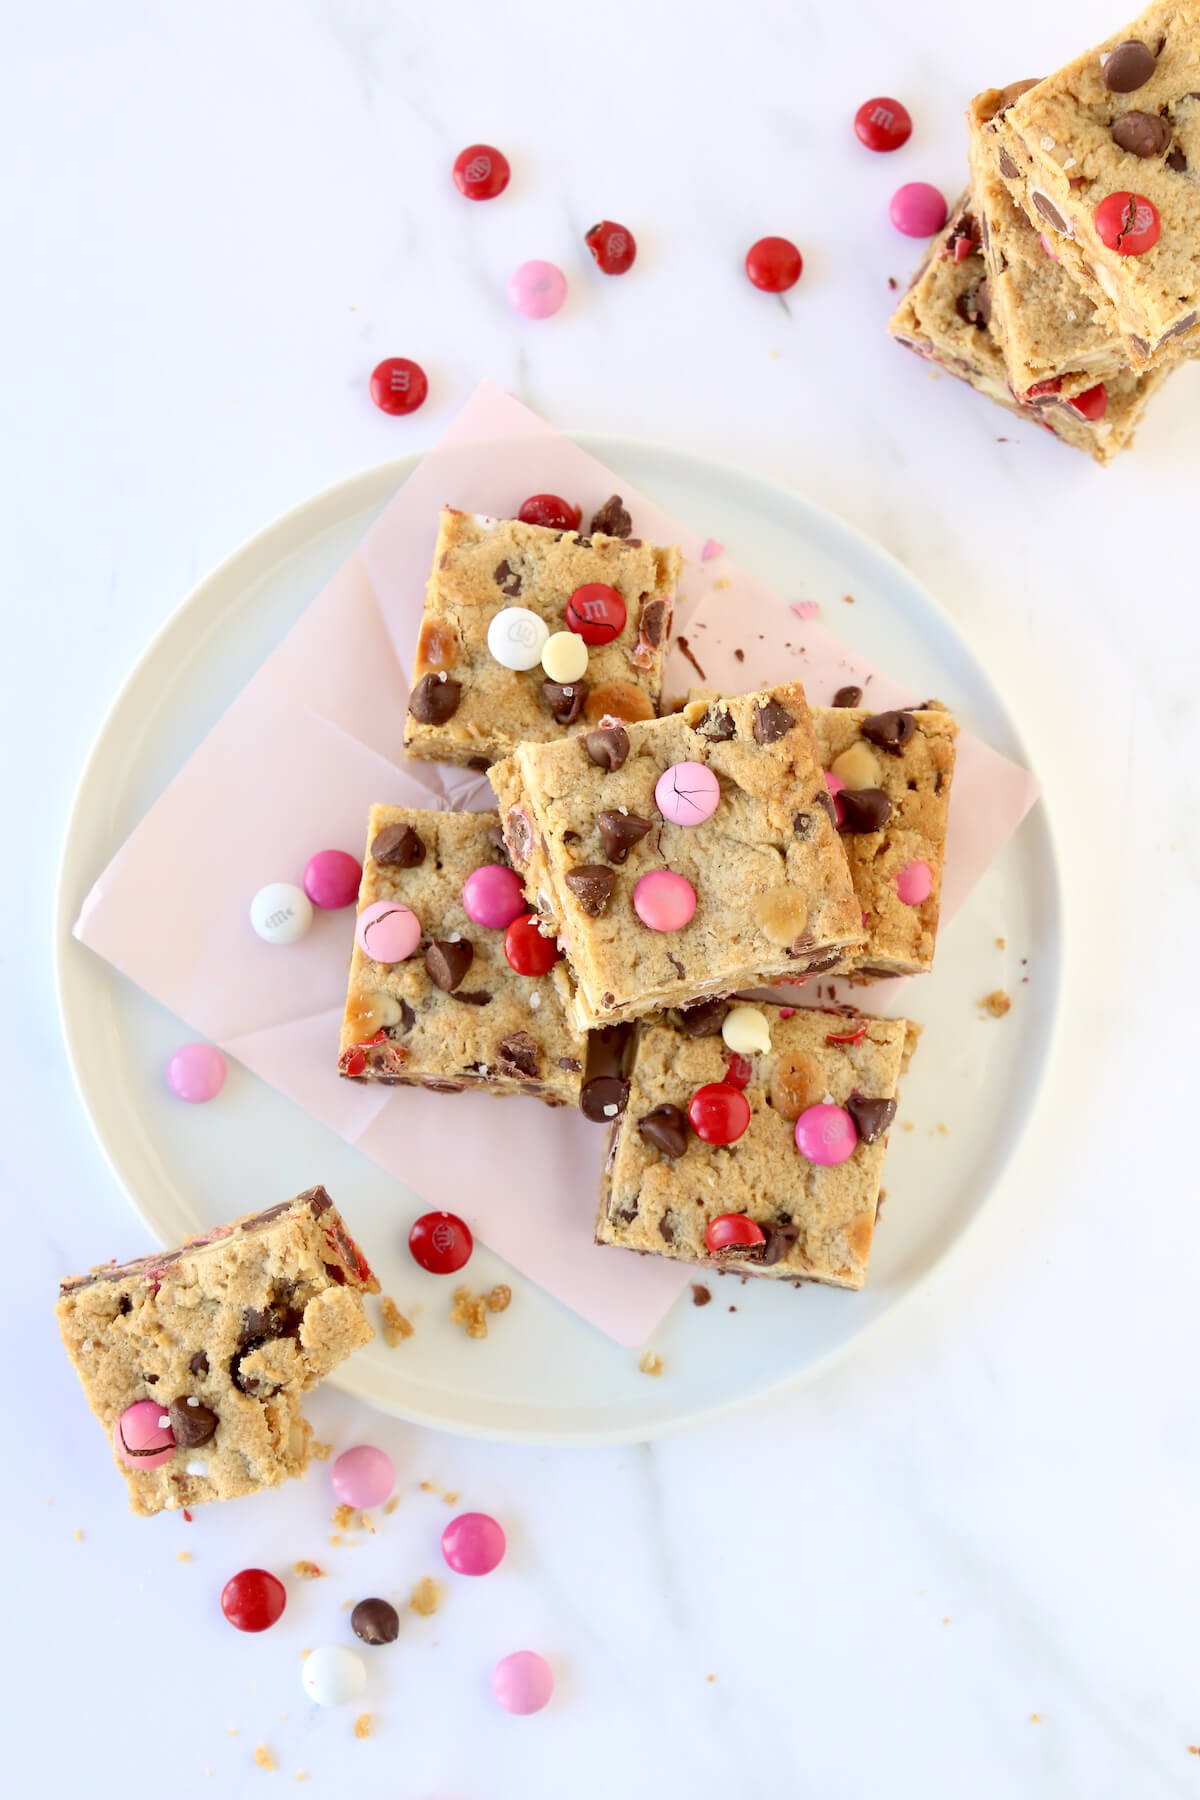 Cookie bar squares stacked on top of each other on a white plate with pink, red and white m&m candies.  